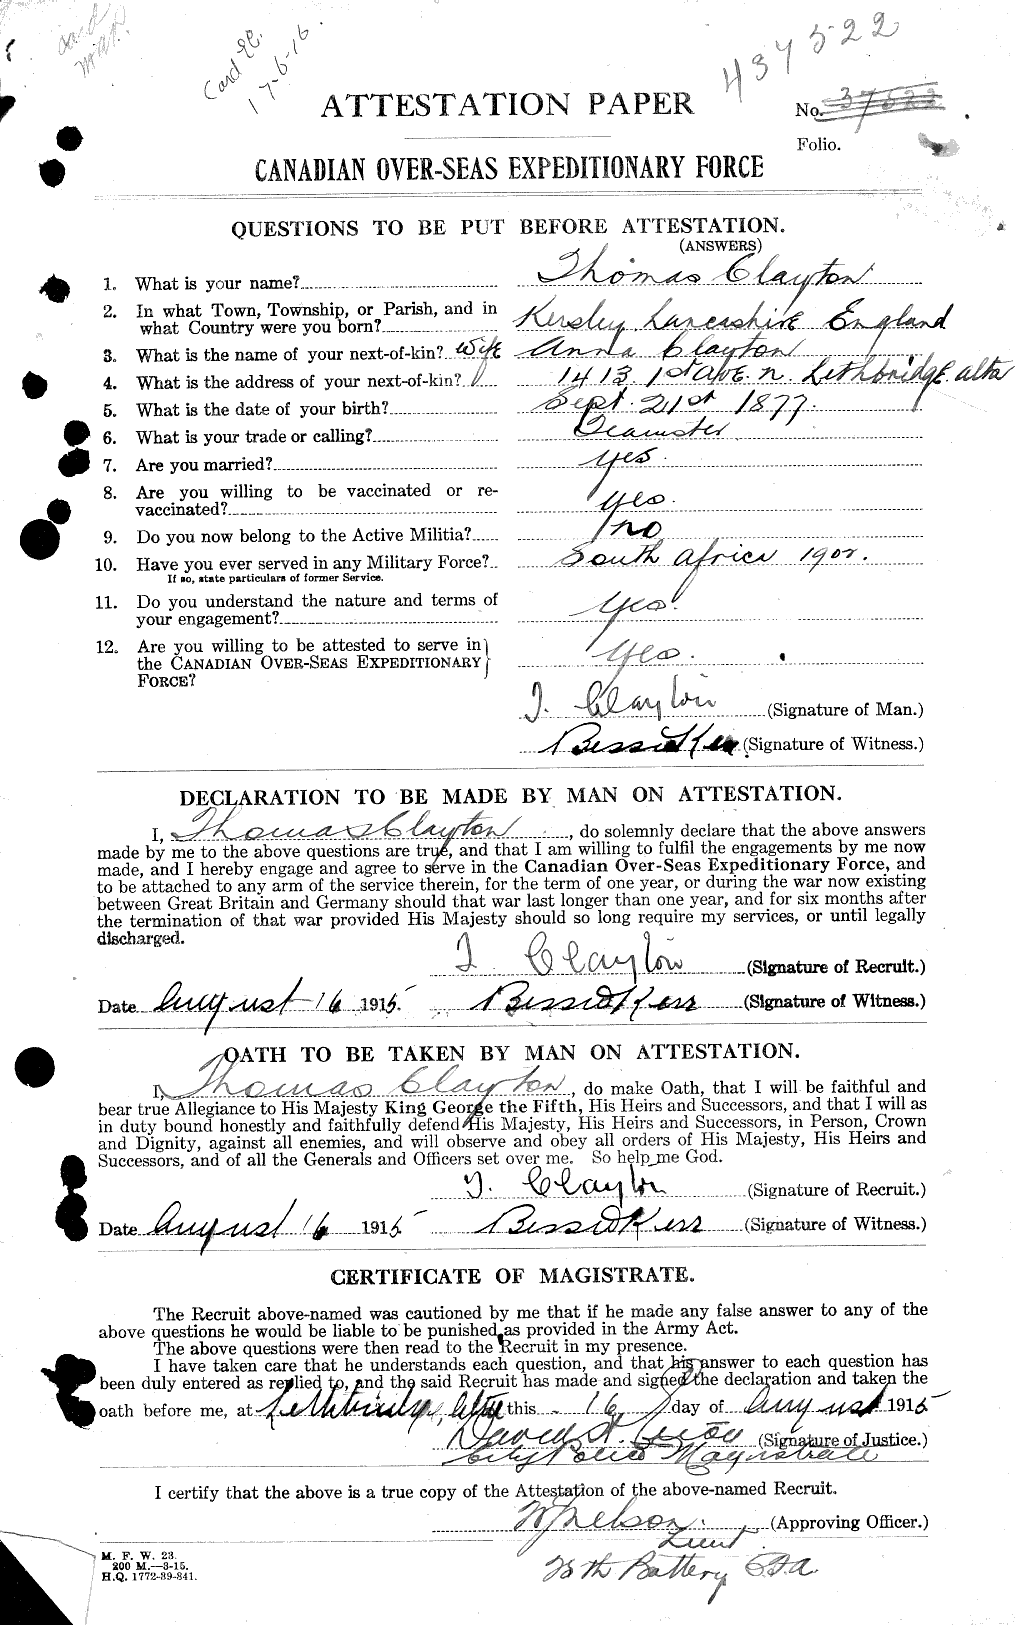 Personnel Records of the First World War - CEF 019288a